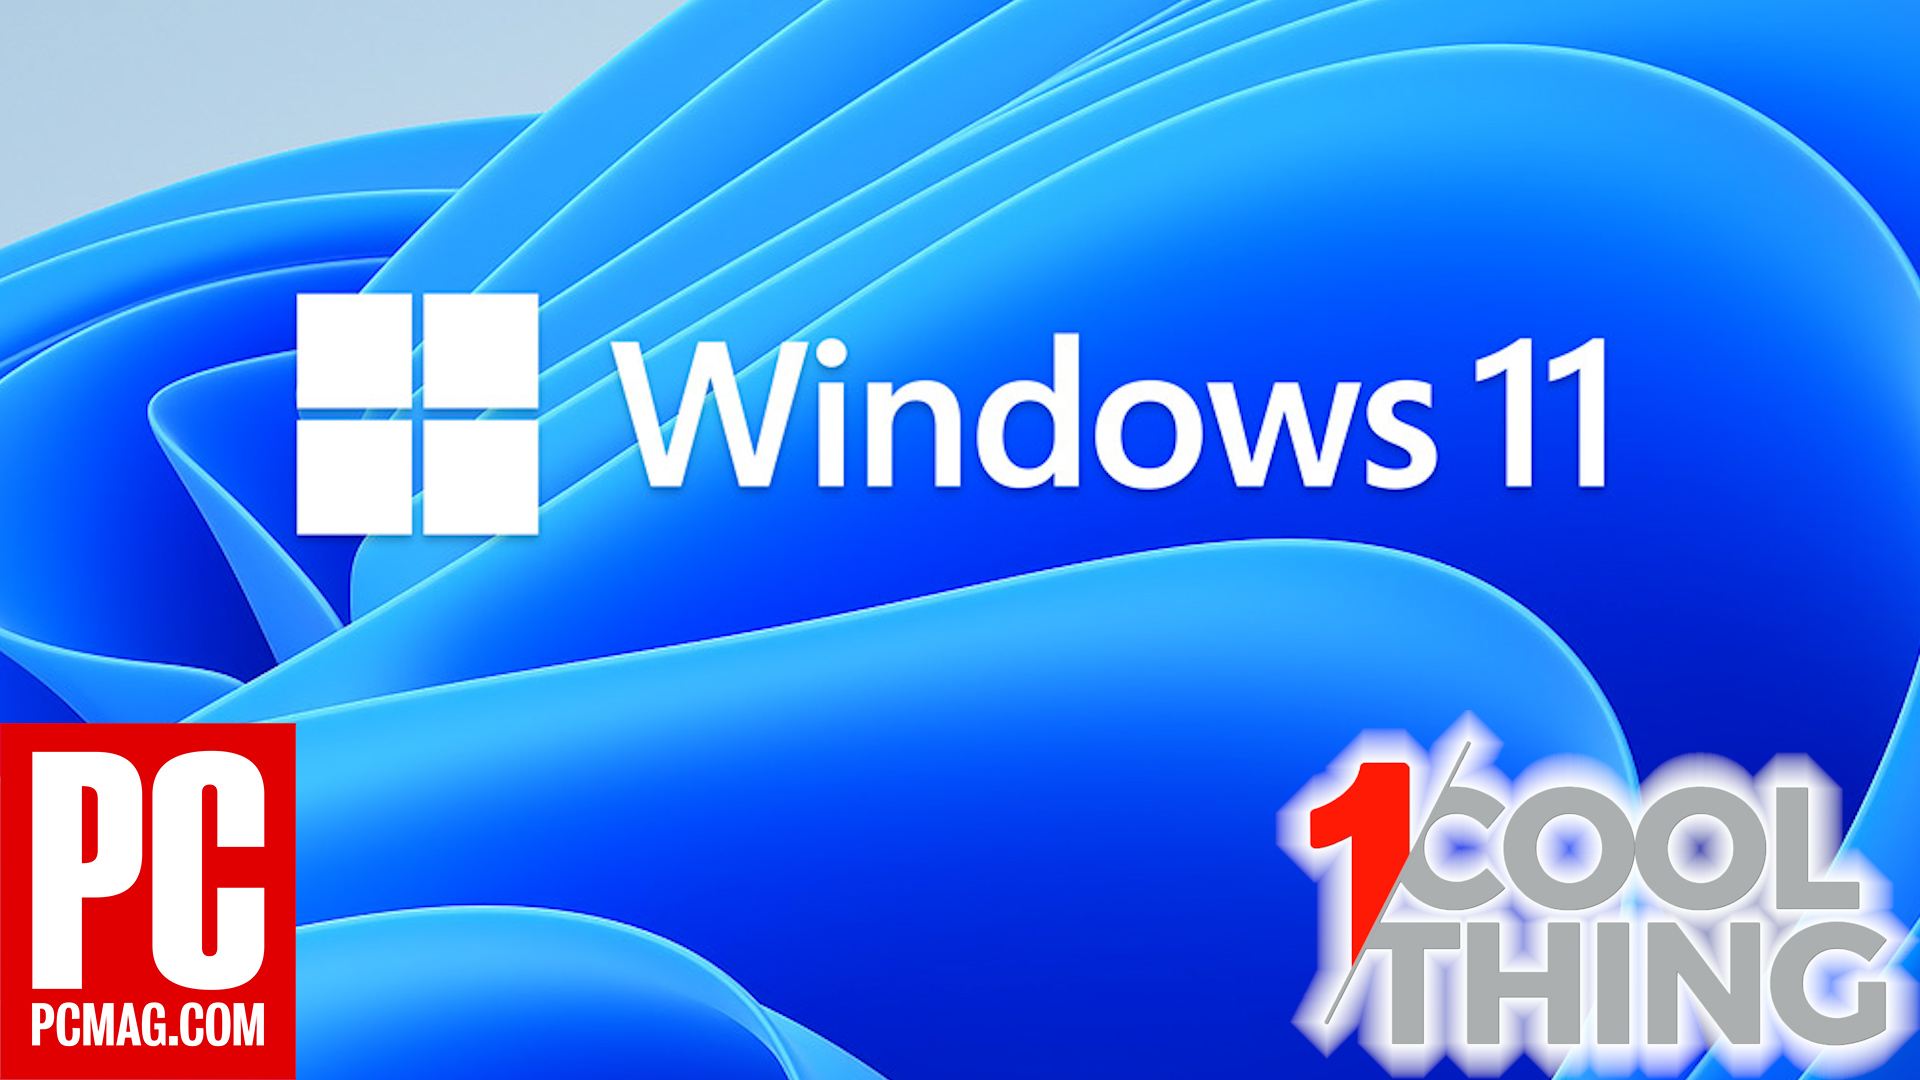 Windows 11: The Review